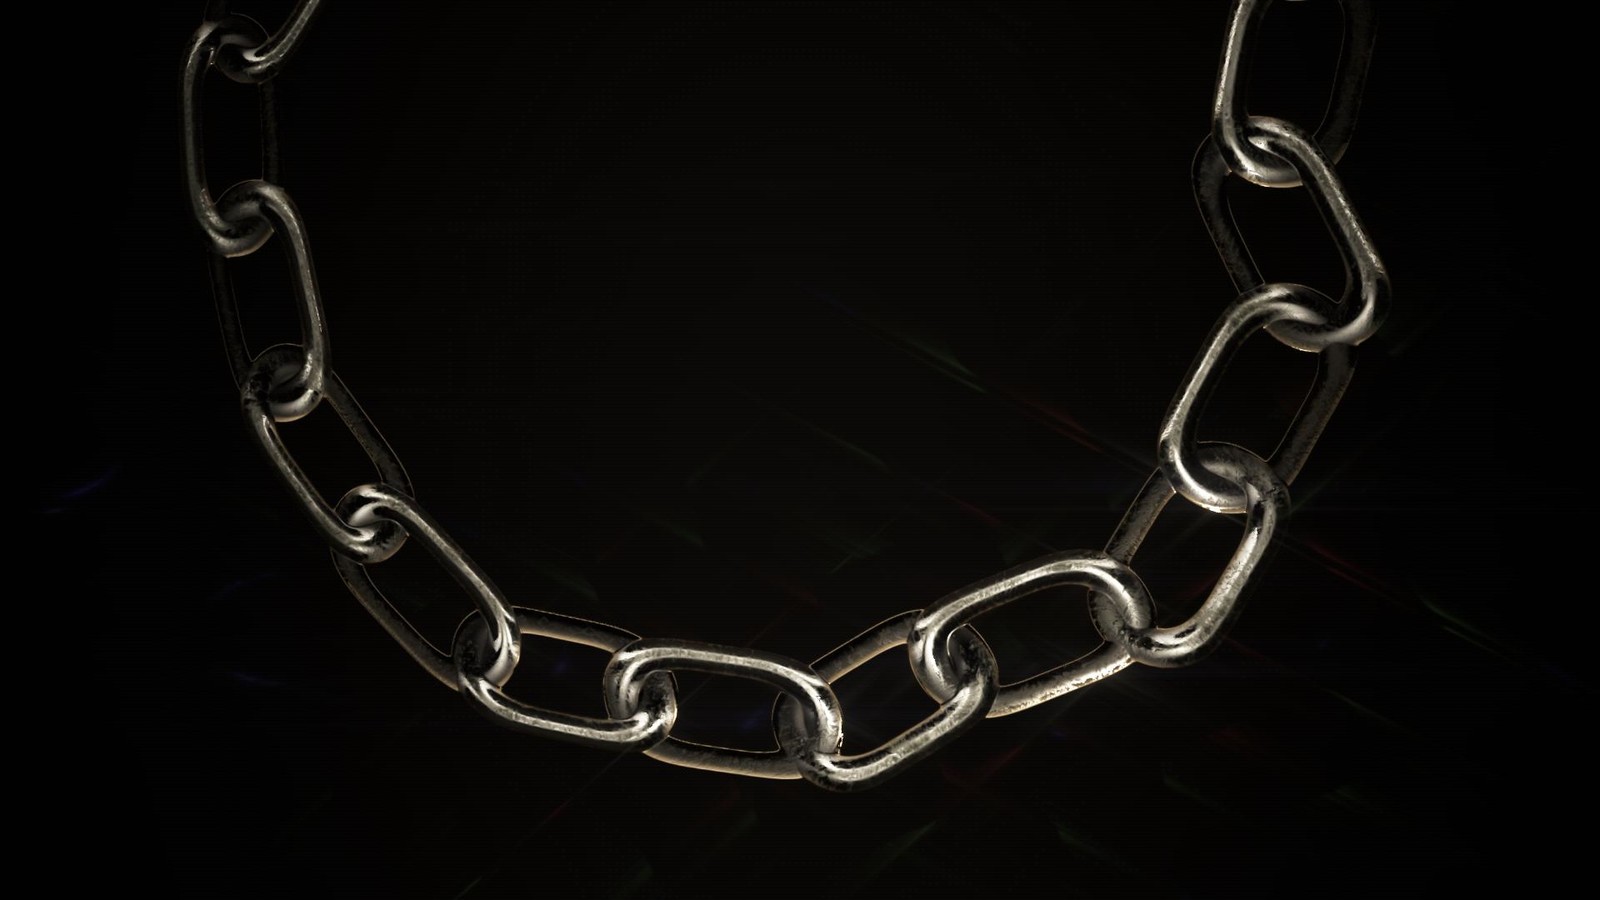 Use either a straight chain or a circular chain.